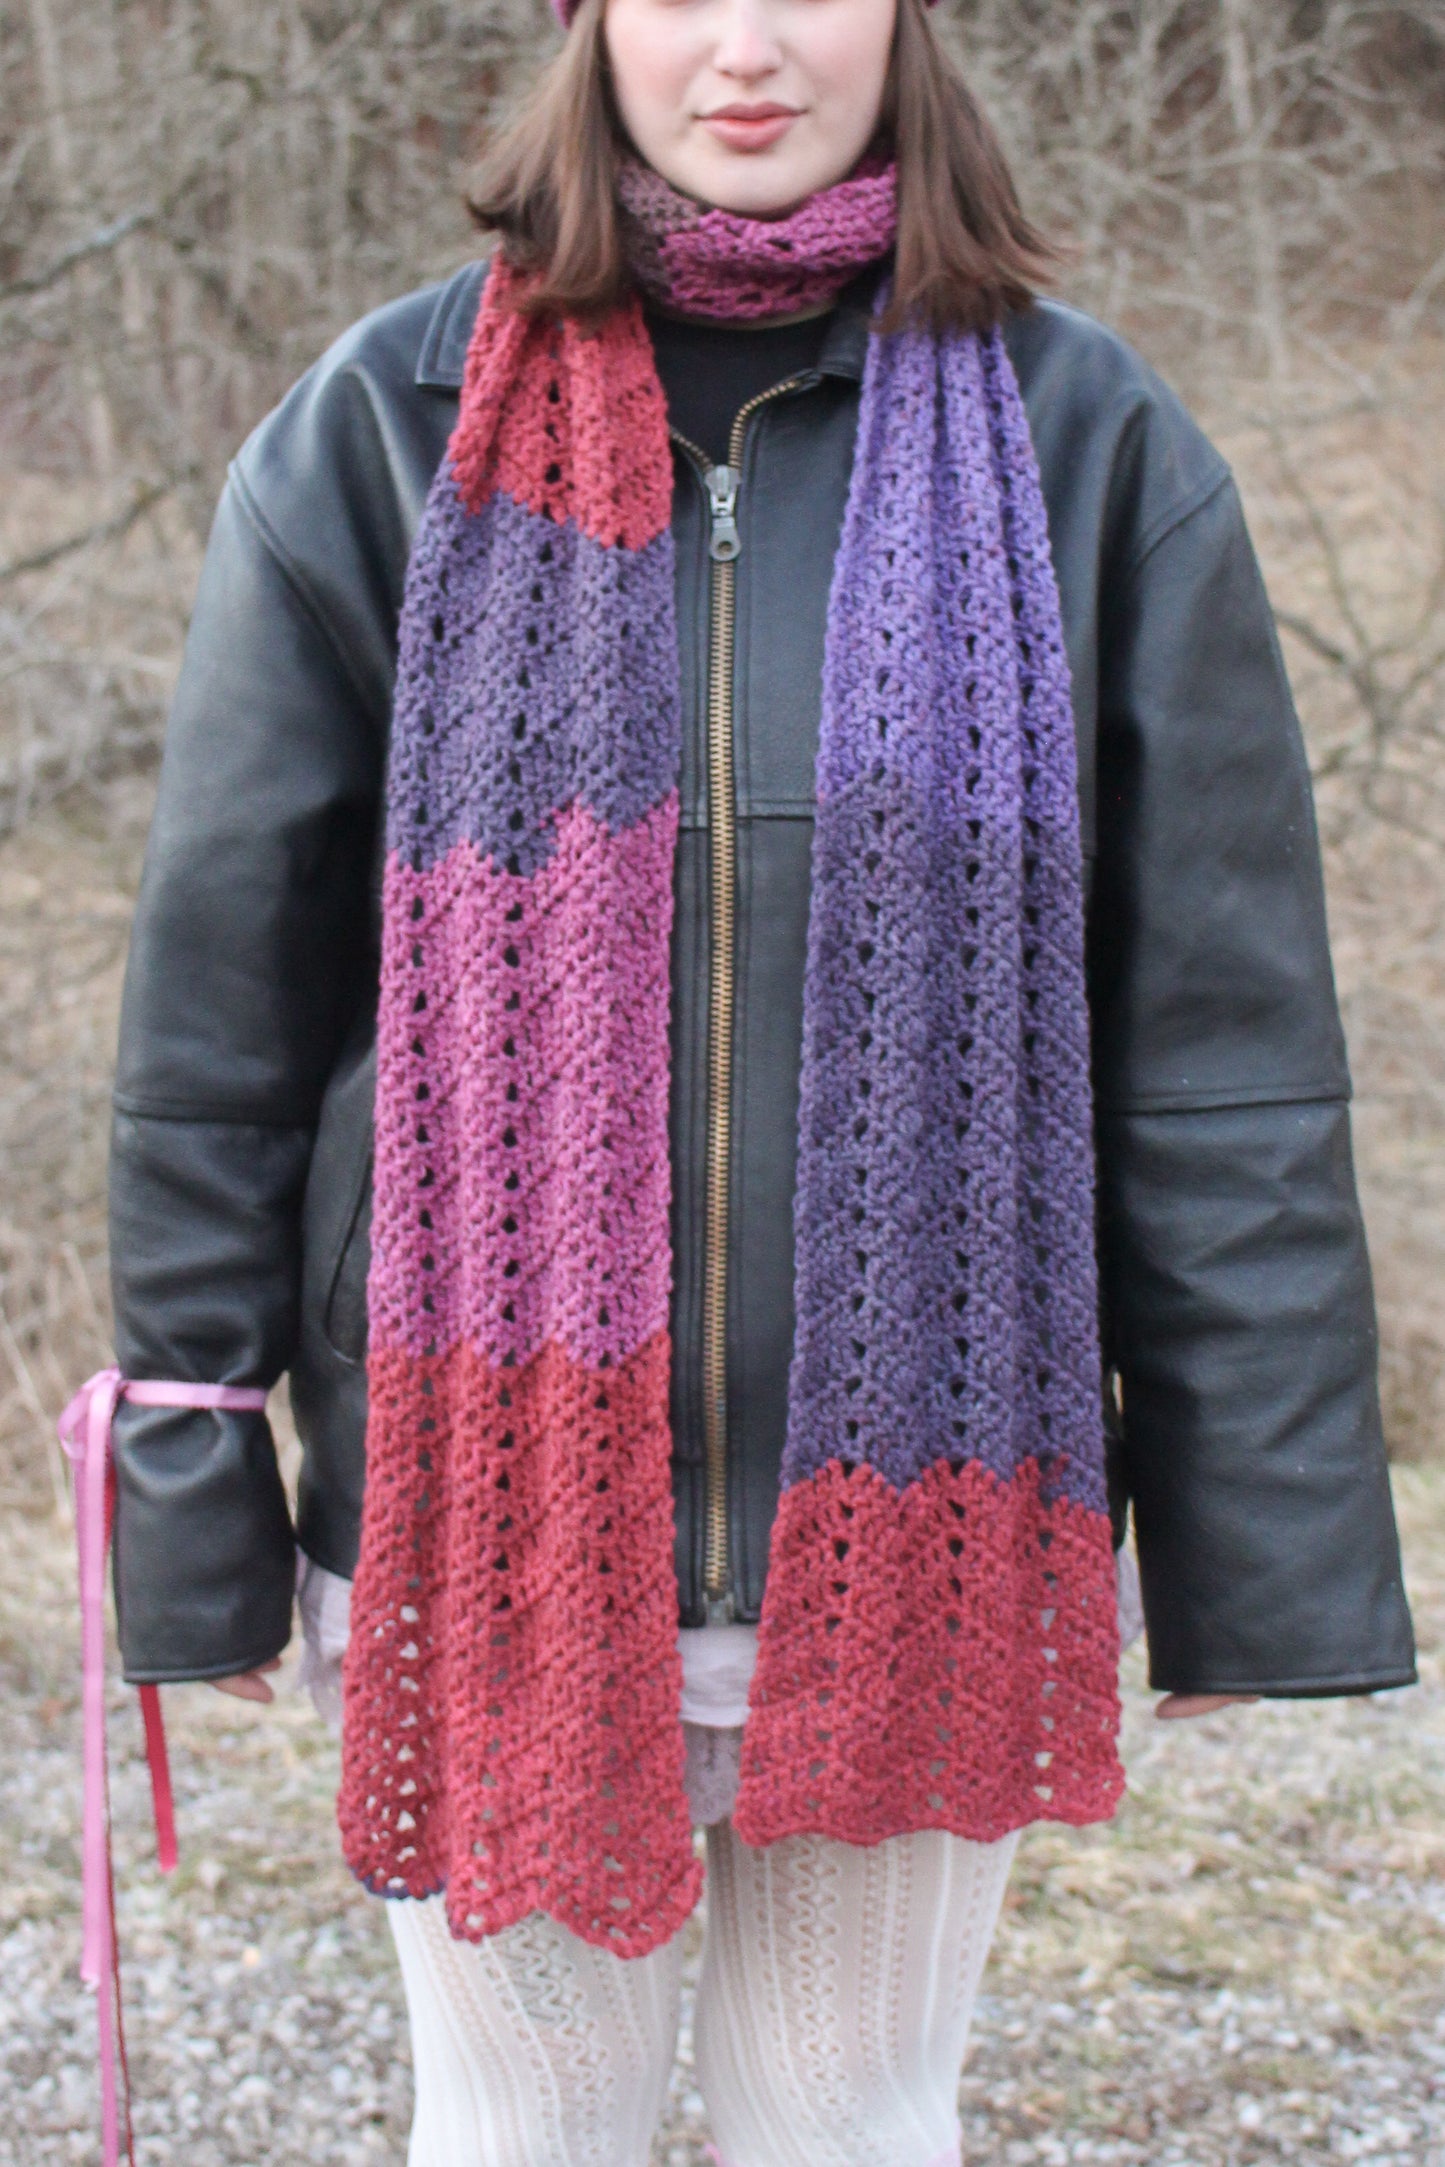 90s red & purple knit scarf